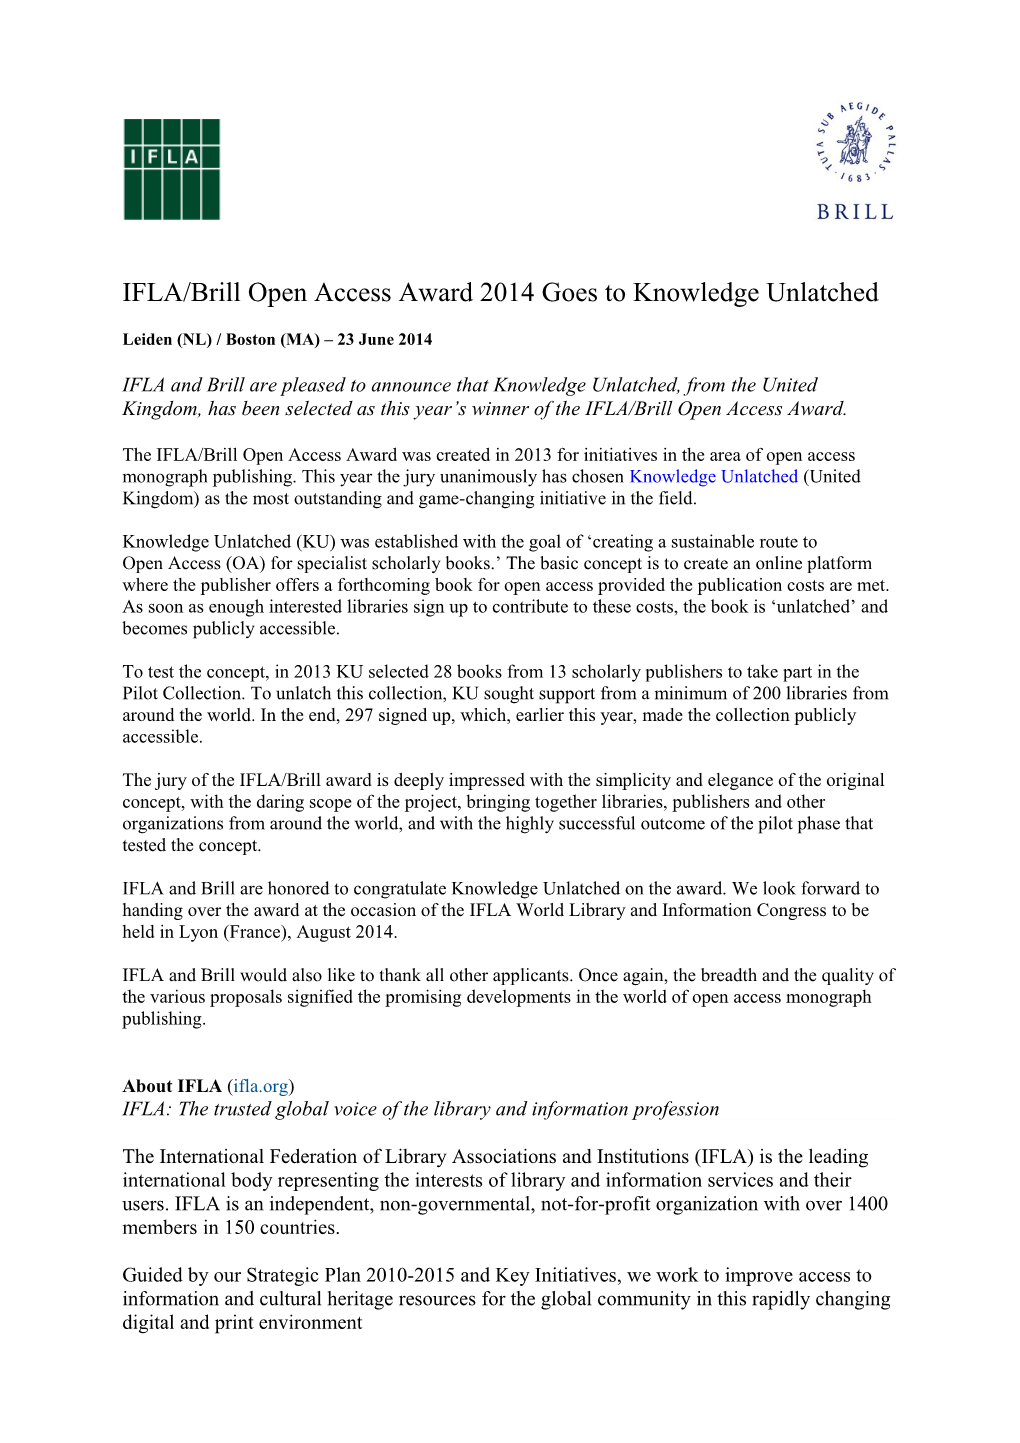 IFLA/Brill Open Access Award 2014 Goes to Knowledge Unlatched